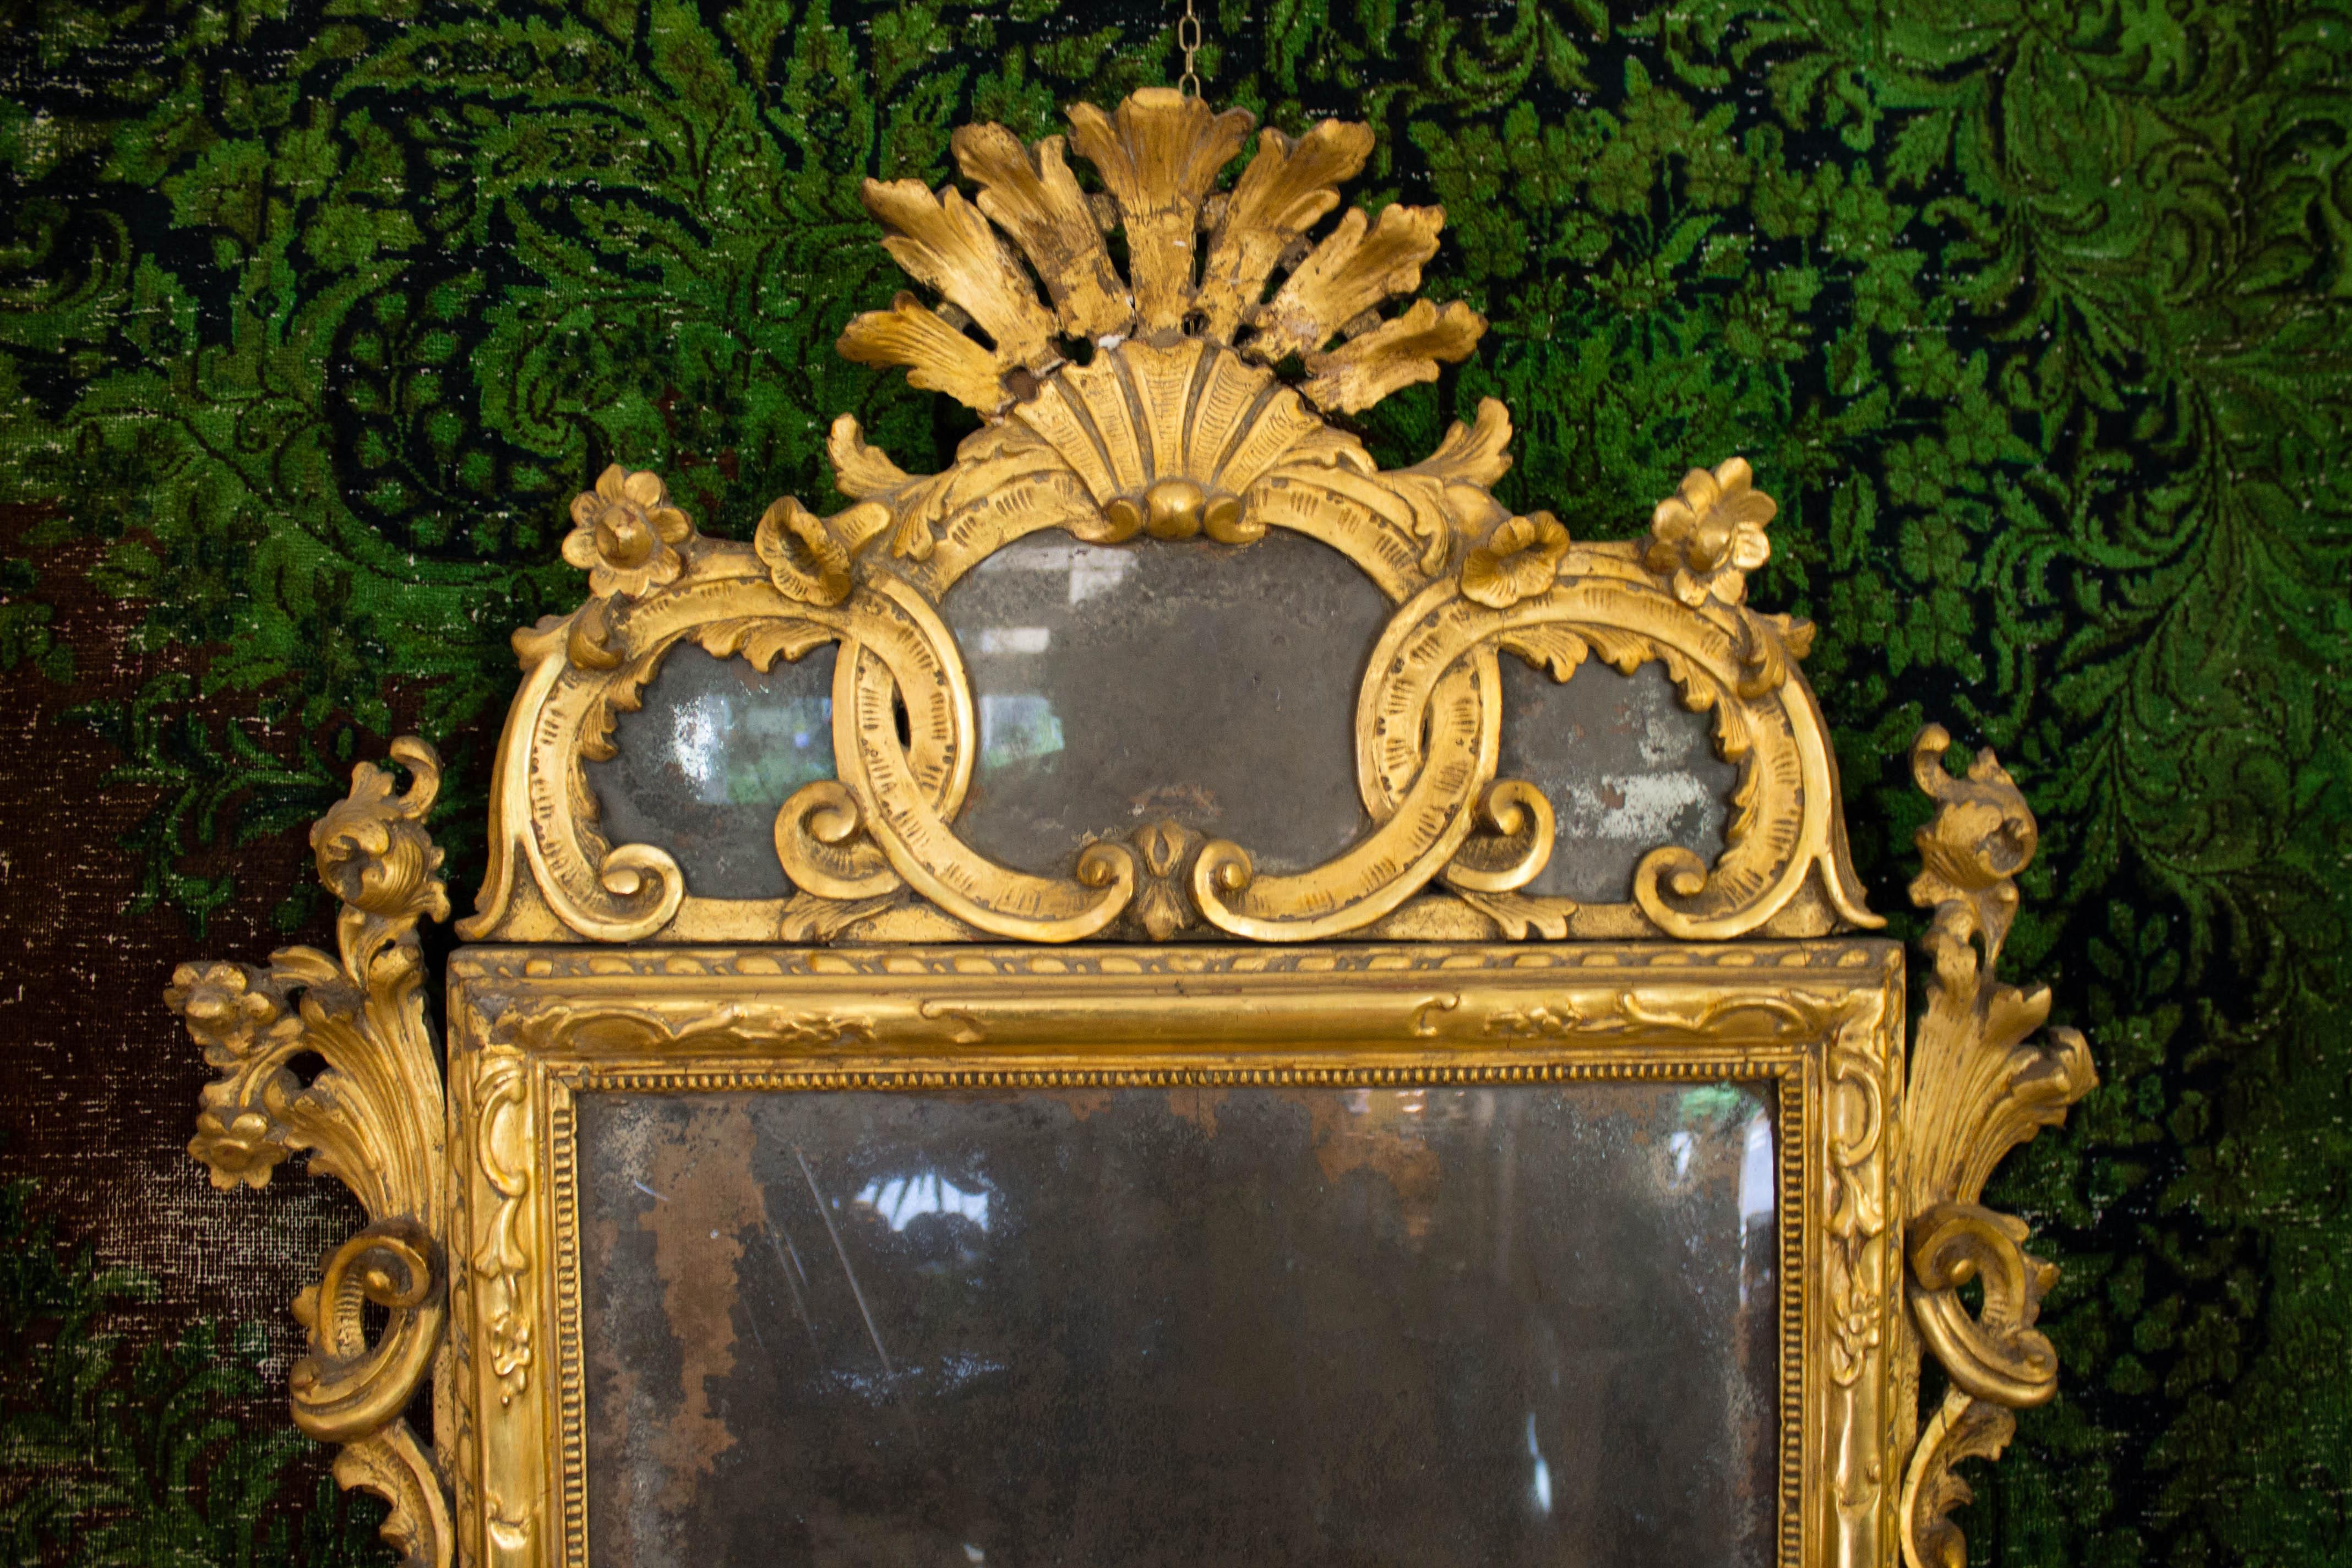 Pair of carved and gilded wooden mirrors from the 18th century made in Sicily
Mirror carved and gilded finely gold leaf Louis XV era '700 mirror to the original mercury. gilding is a process of ornamental decoration used on different materials and